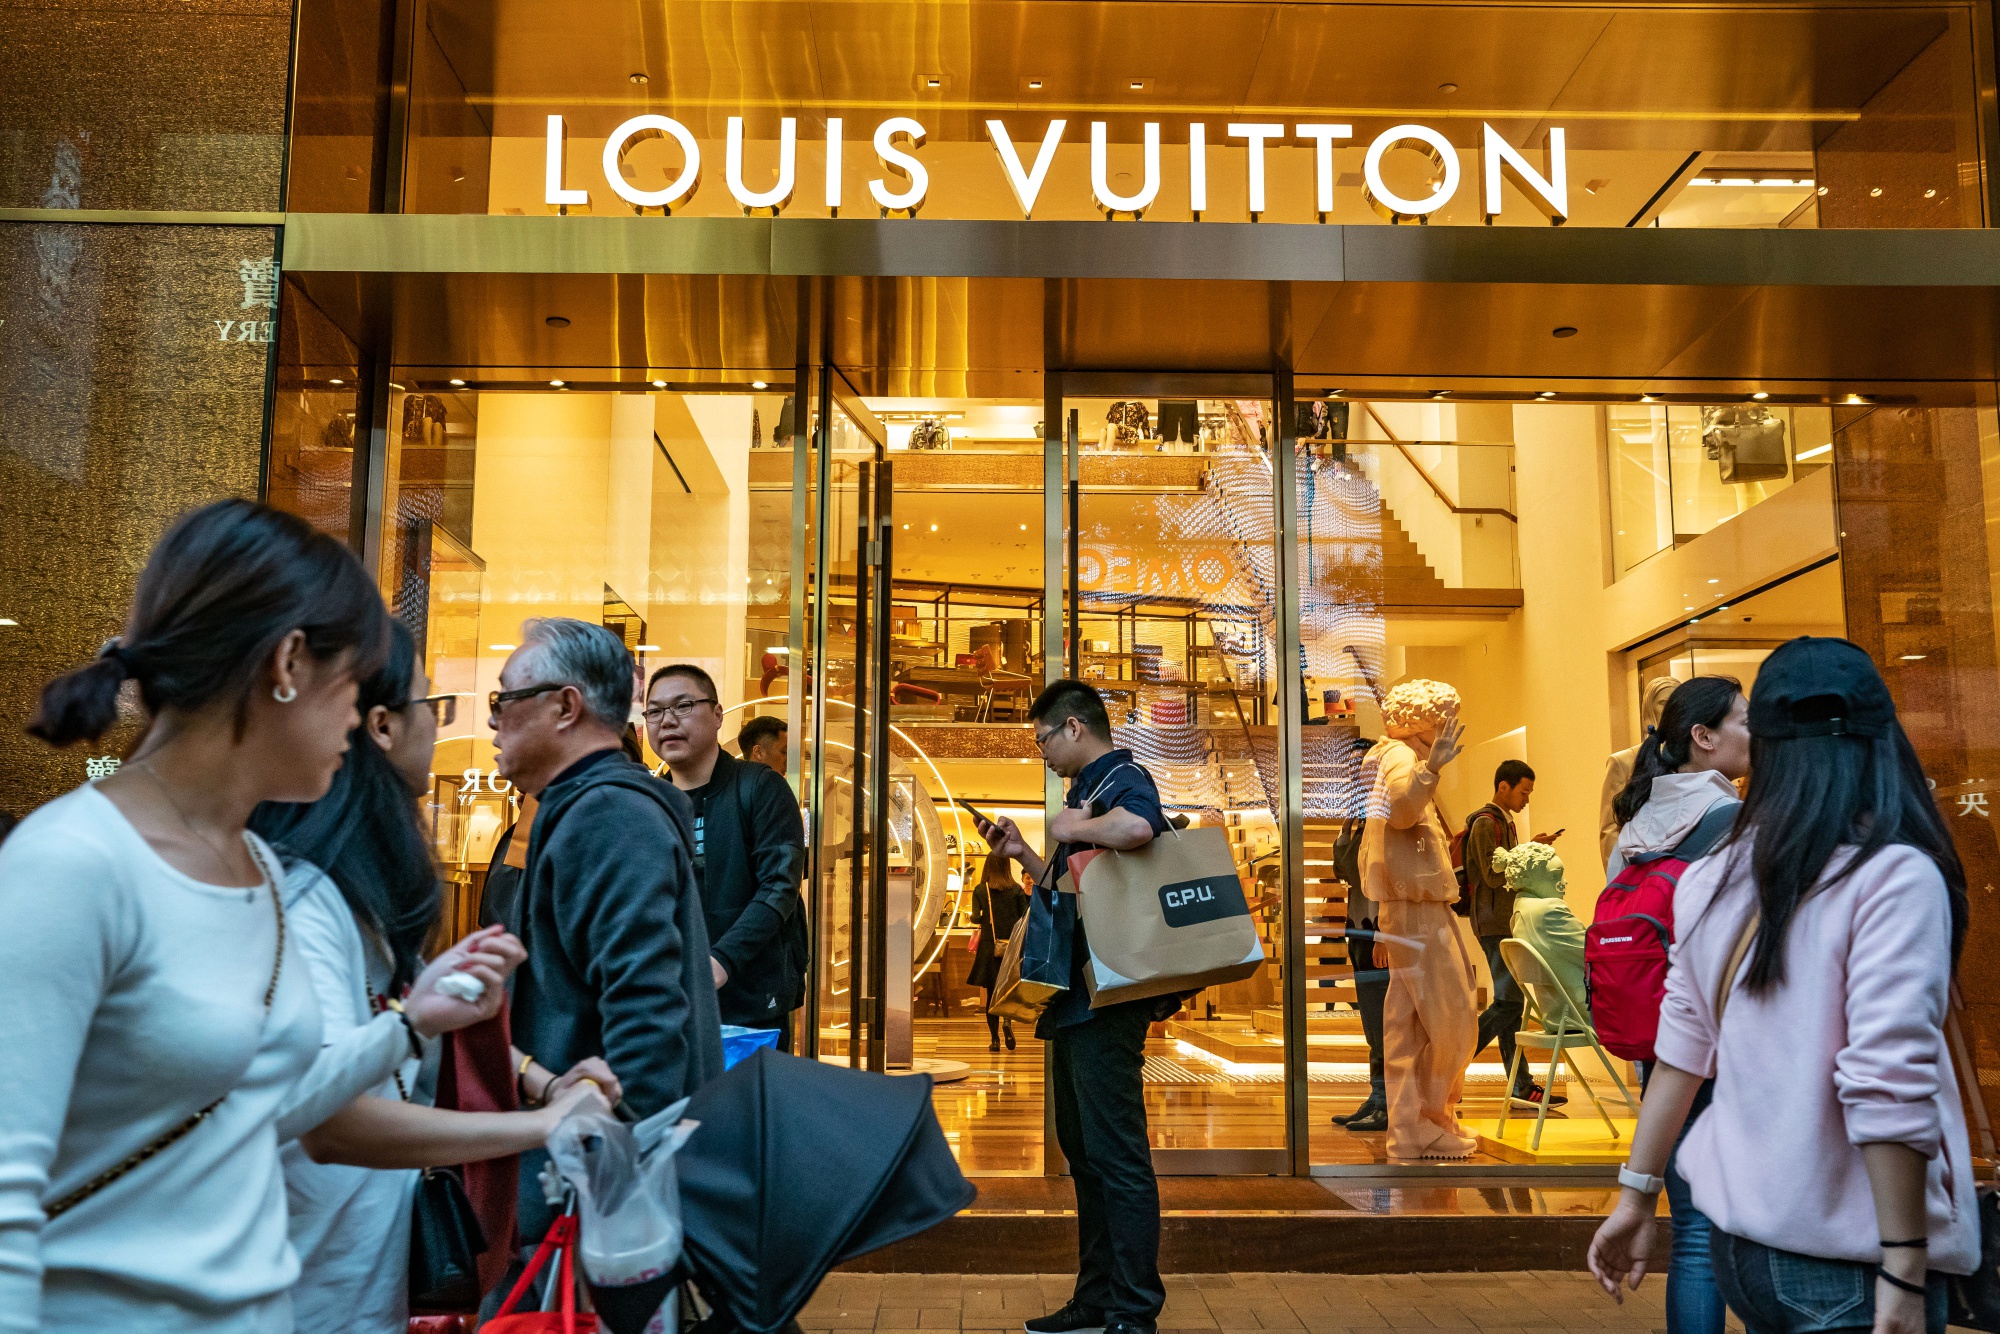 The Transcript on X: Some Key Quotes from the LVMH [@LVMH] Q3